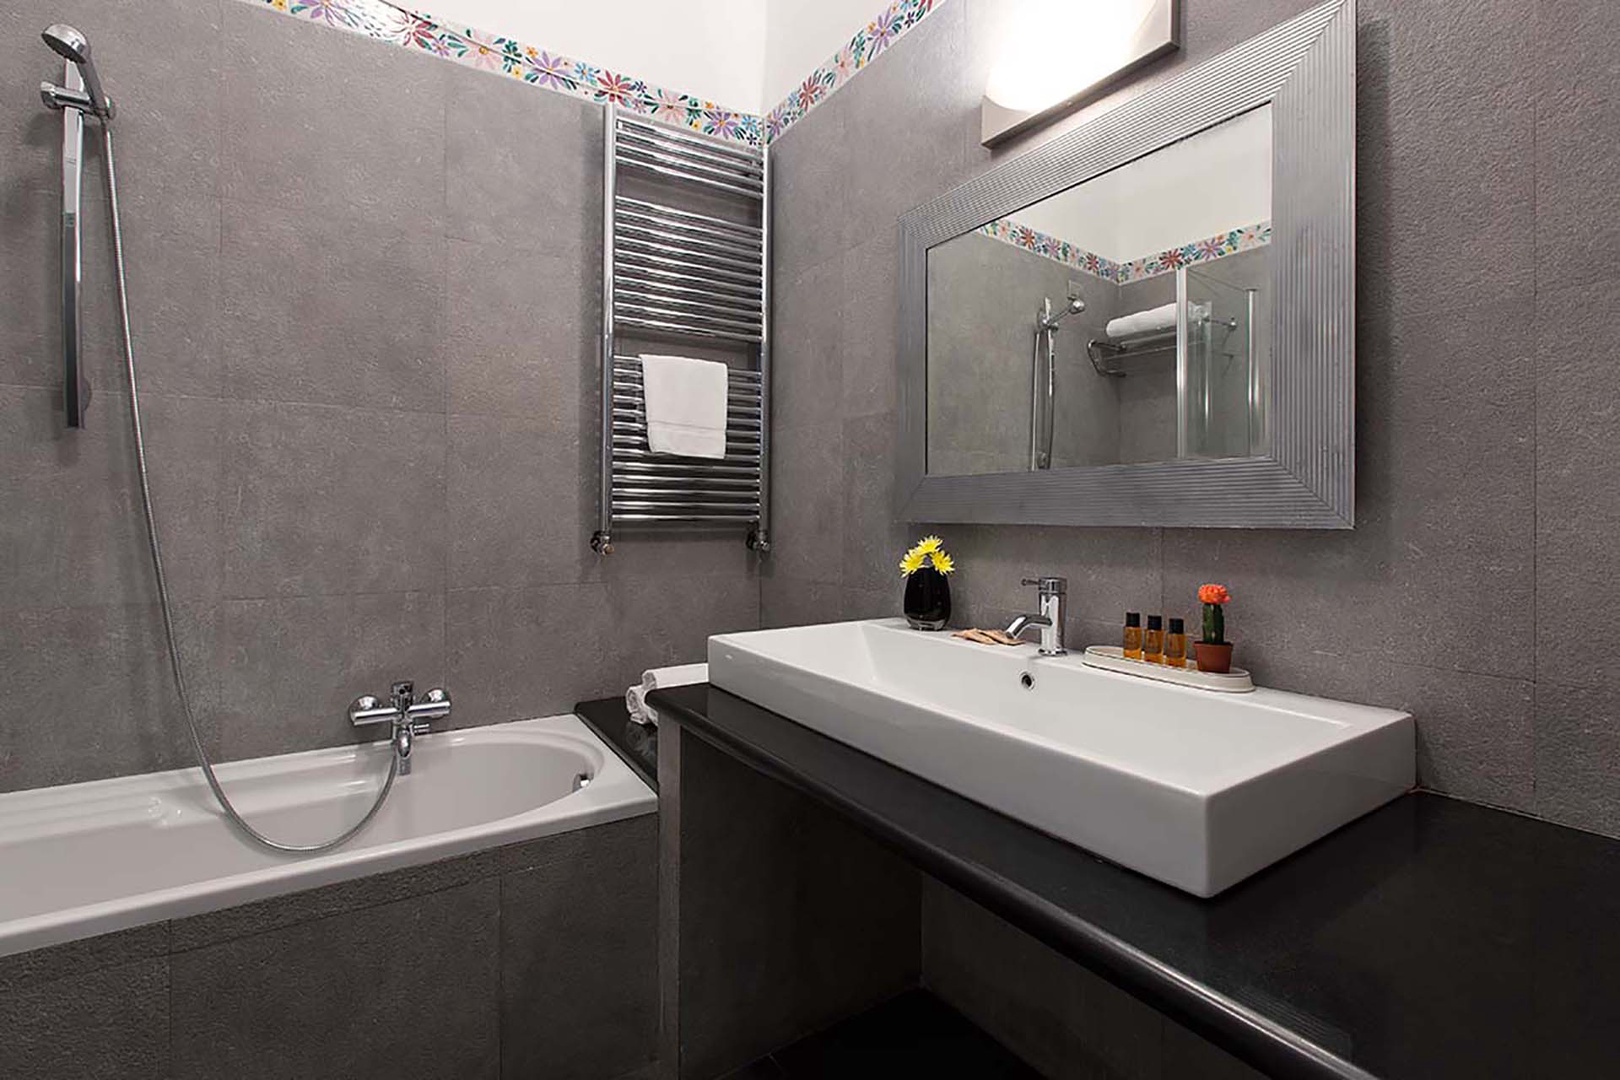 Bathroom shared by bedrooms 2, 4 & 5